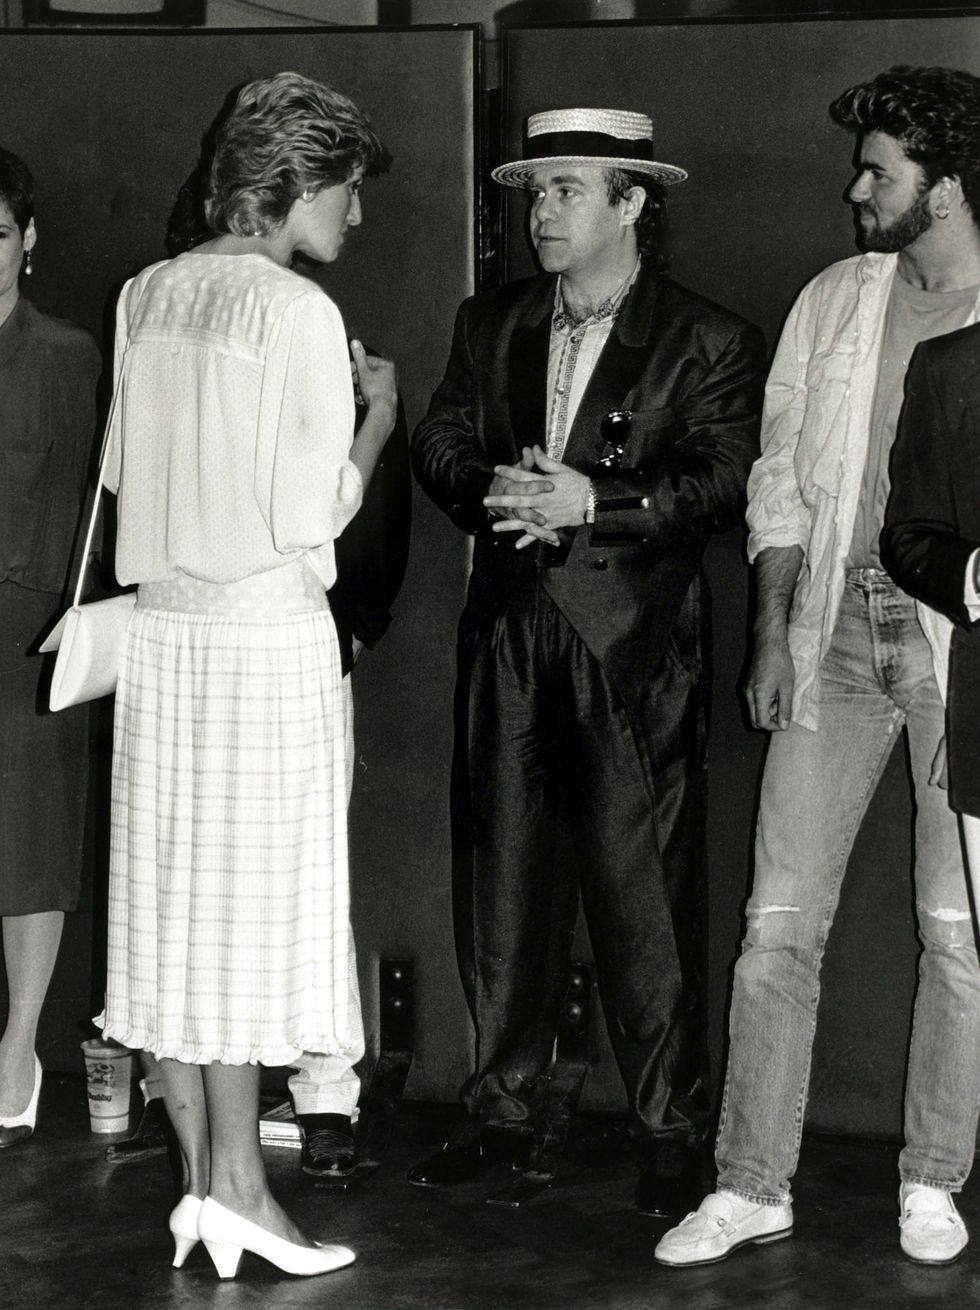 Princess Diana chatting with Elton John and George Michael at the Feed the World Live Aid concert in July 1985